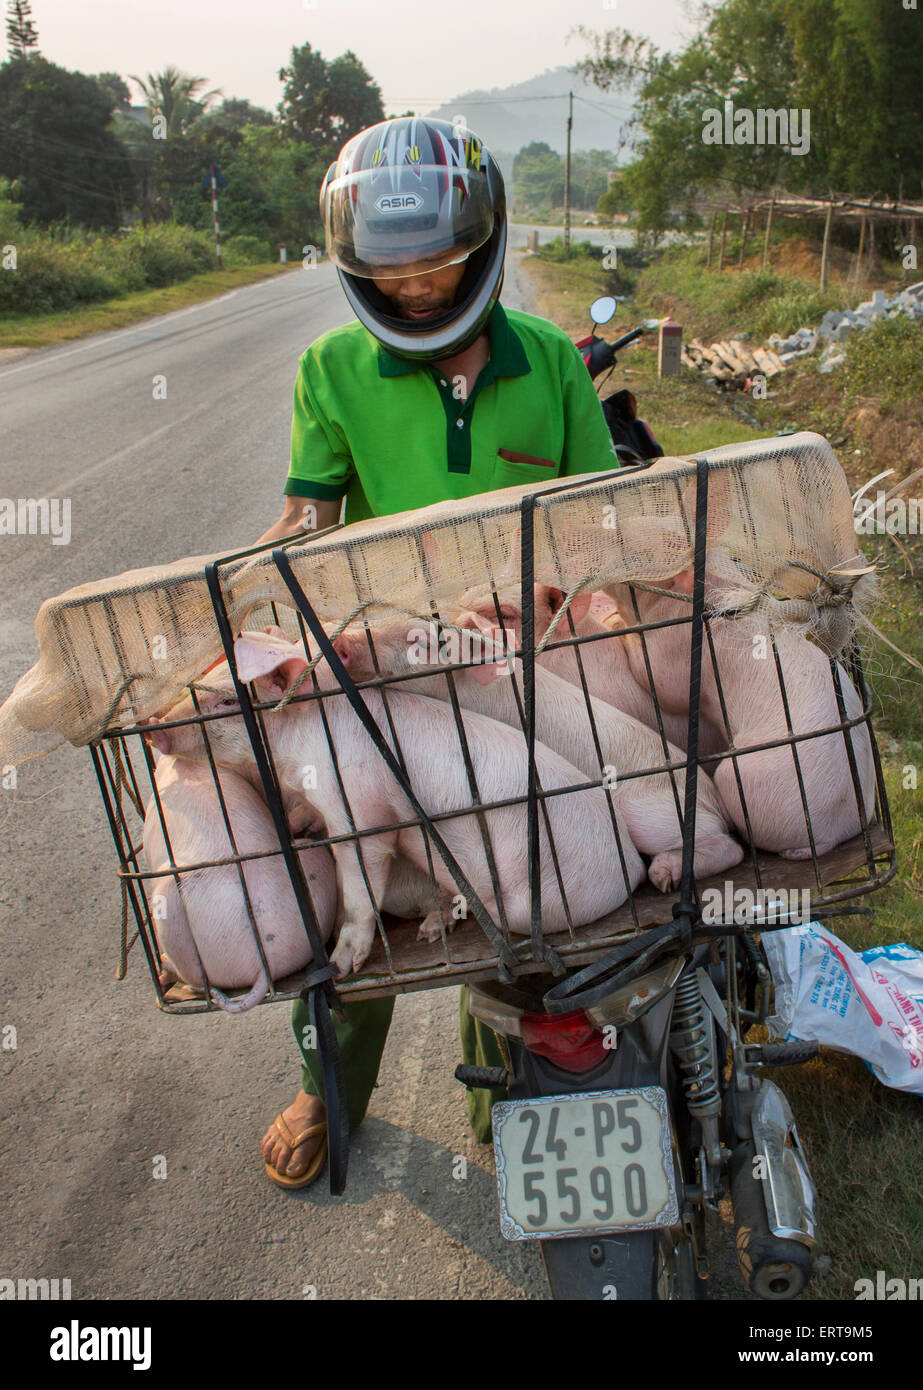 Motorbikes are the main means of transport in Vietnam. Stock Photo